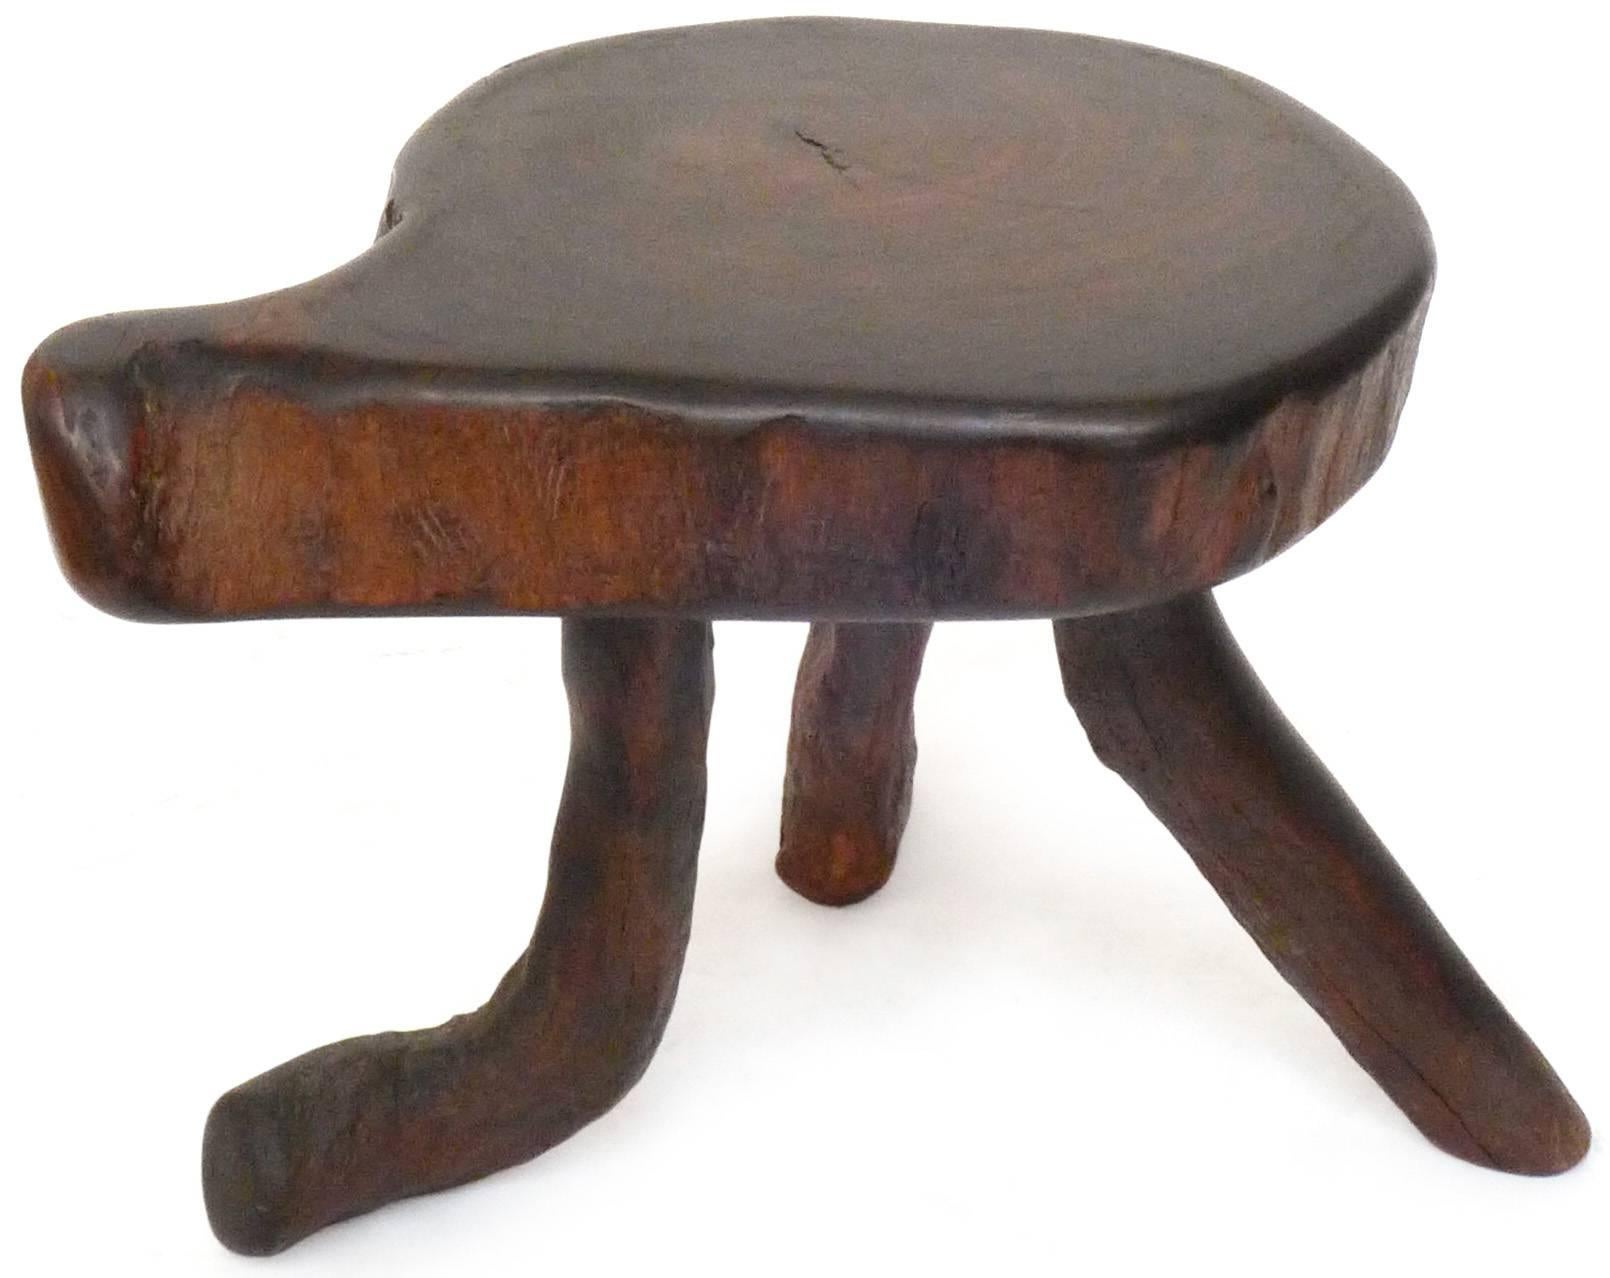 A wonderful pair of organic wood stools or side tables. Compact, three-legged, asymmetrical forms replete with fantastic free-edge and natural texture details, wearing a rich, dark-walnut patina. Pleasingly well-built and sturdy. Great scale and